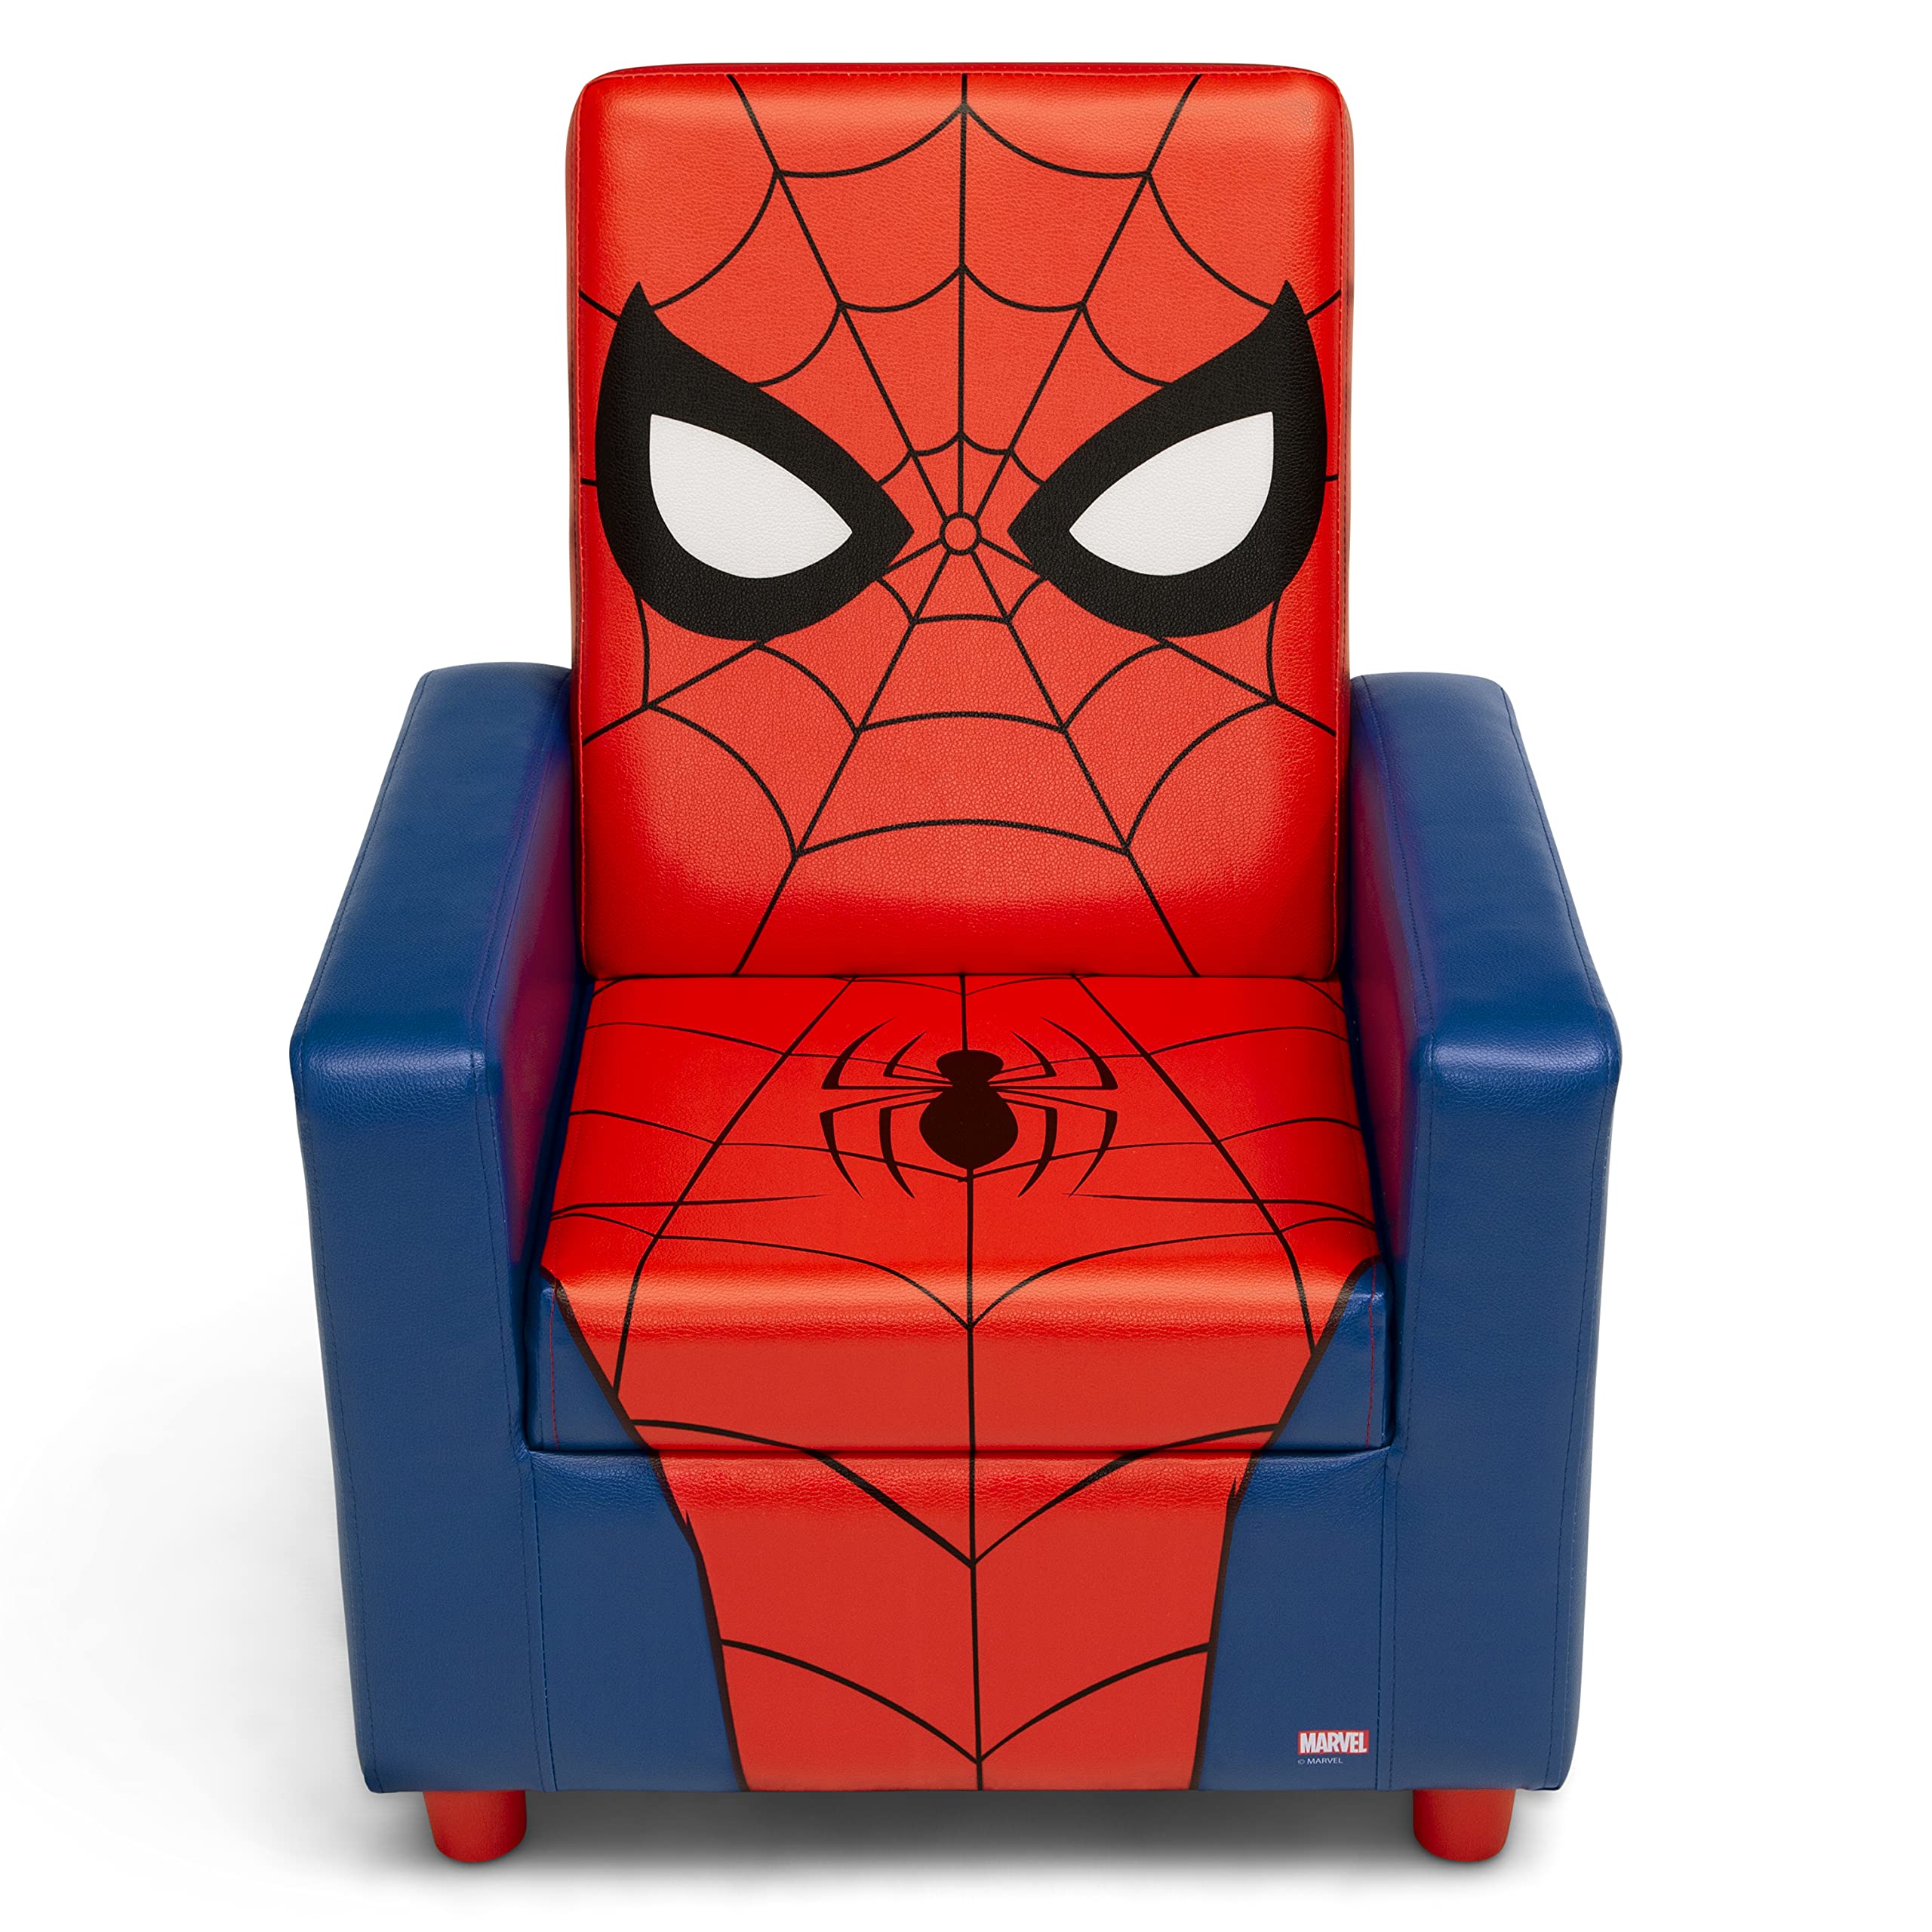 Delta Children's High Back Upholstered Wood Chair (Spider-Man or Batman) $68.97 + Free Shipping